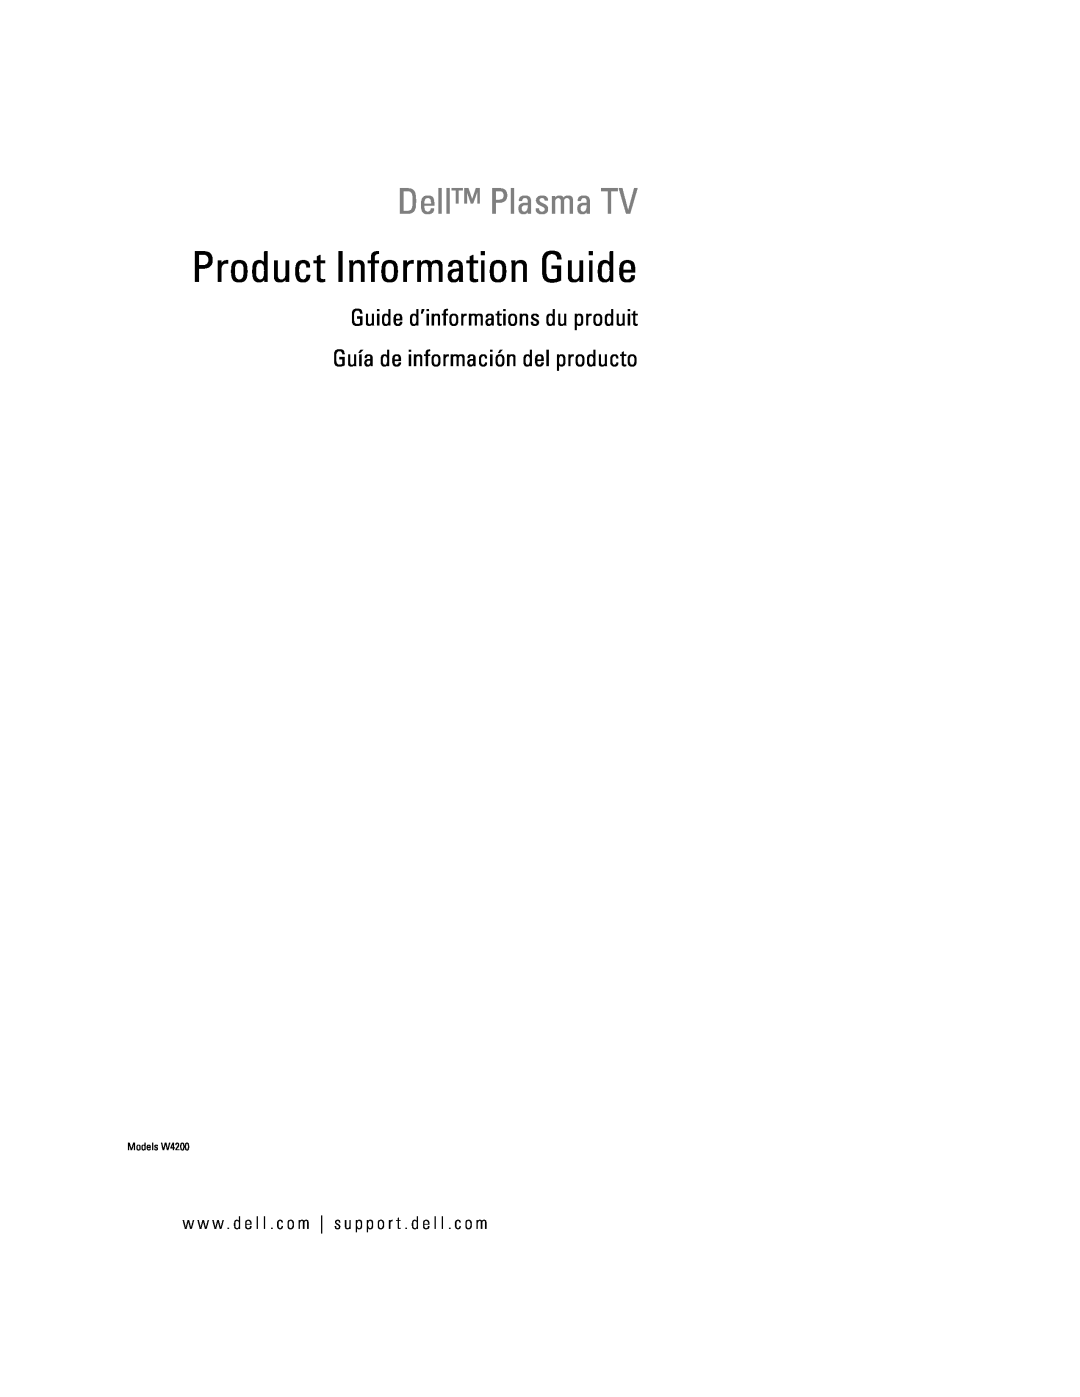 Dell W4200 manual Product Information Guide, Dell Plasma TV, w w w . d e l l . c o m s u p p o r t . d e l l . c o m 